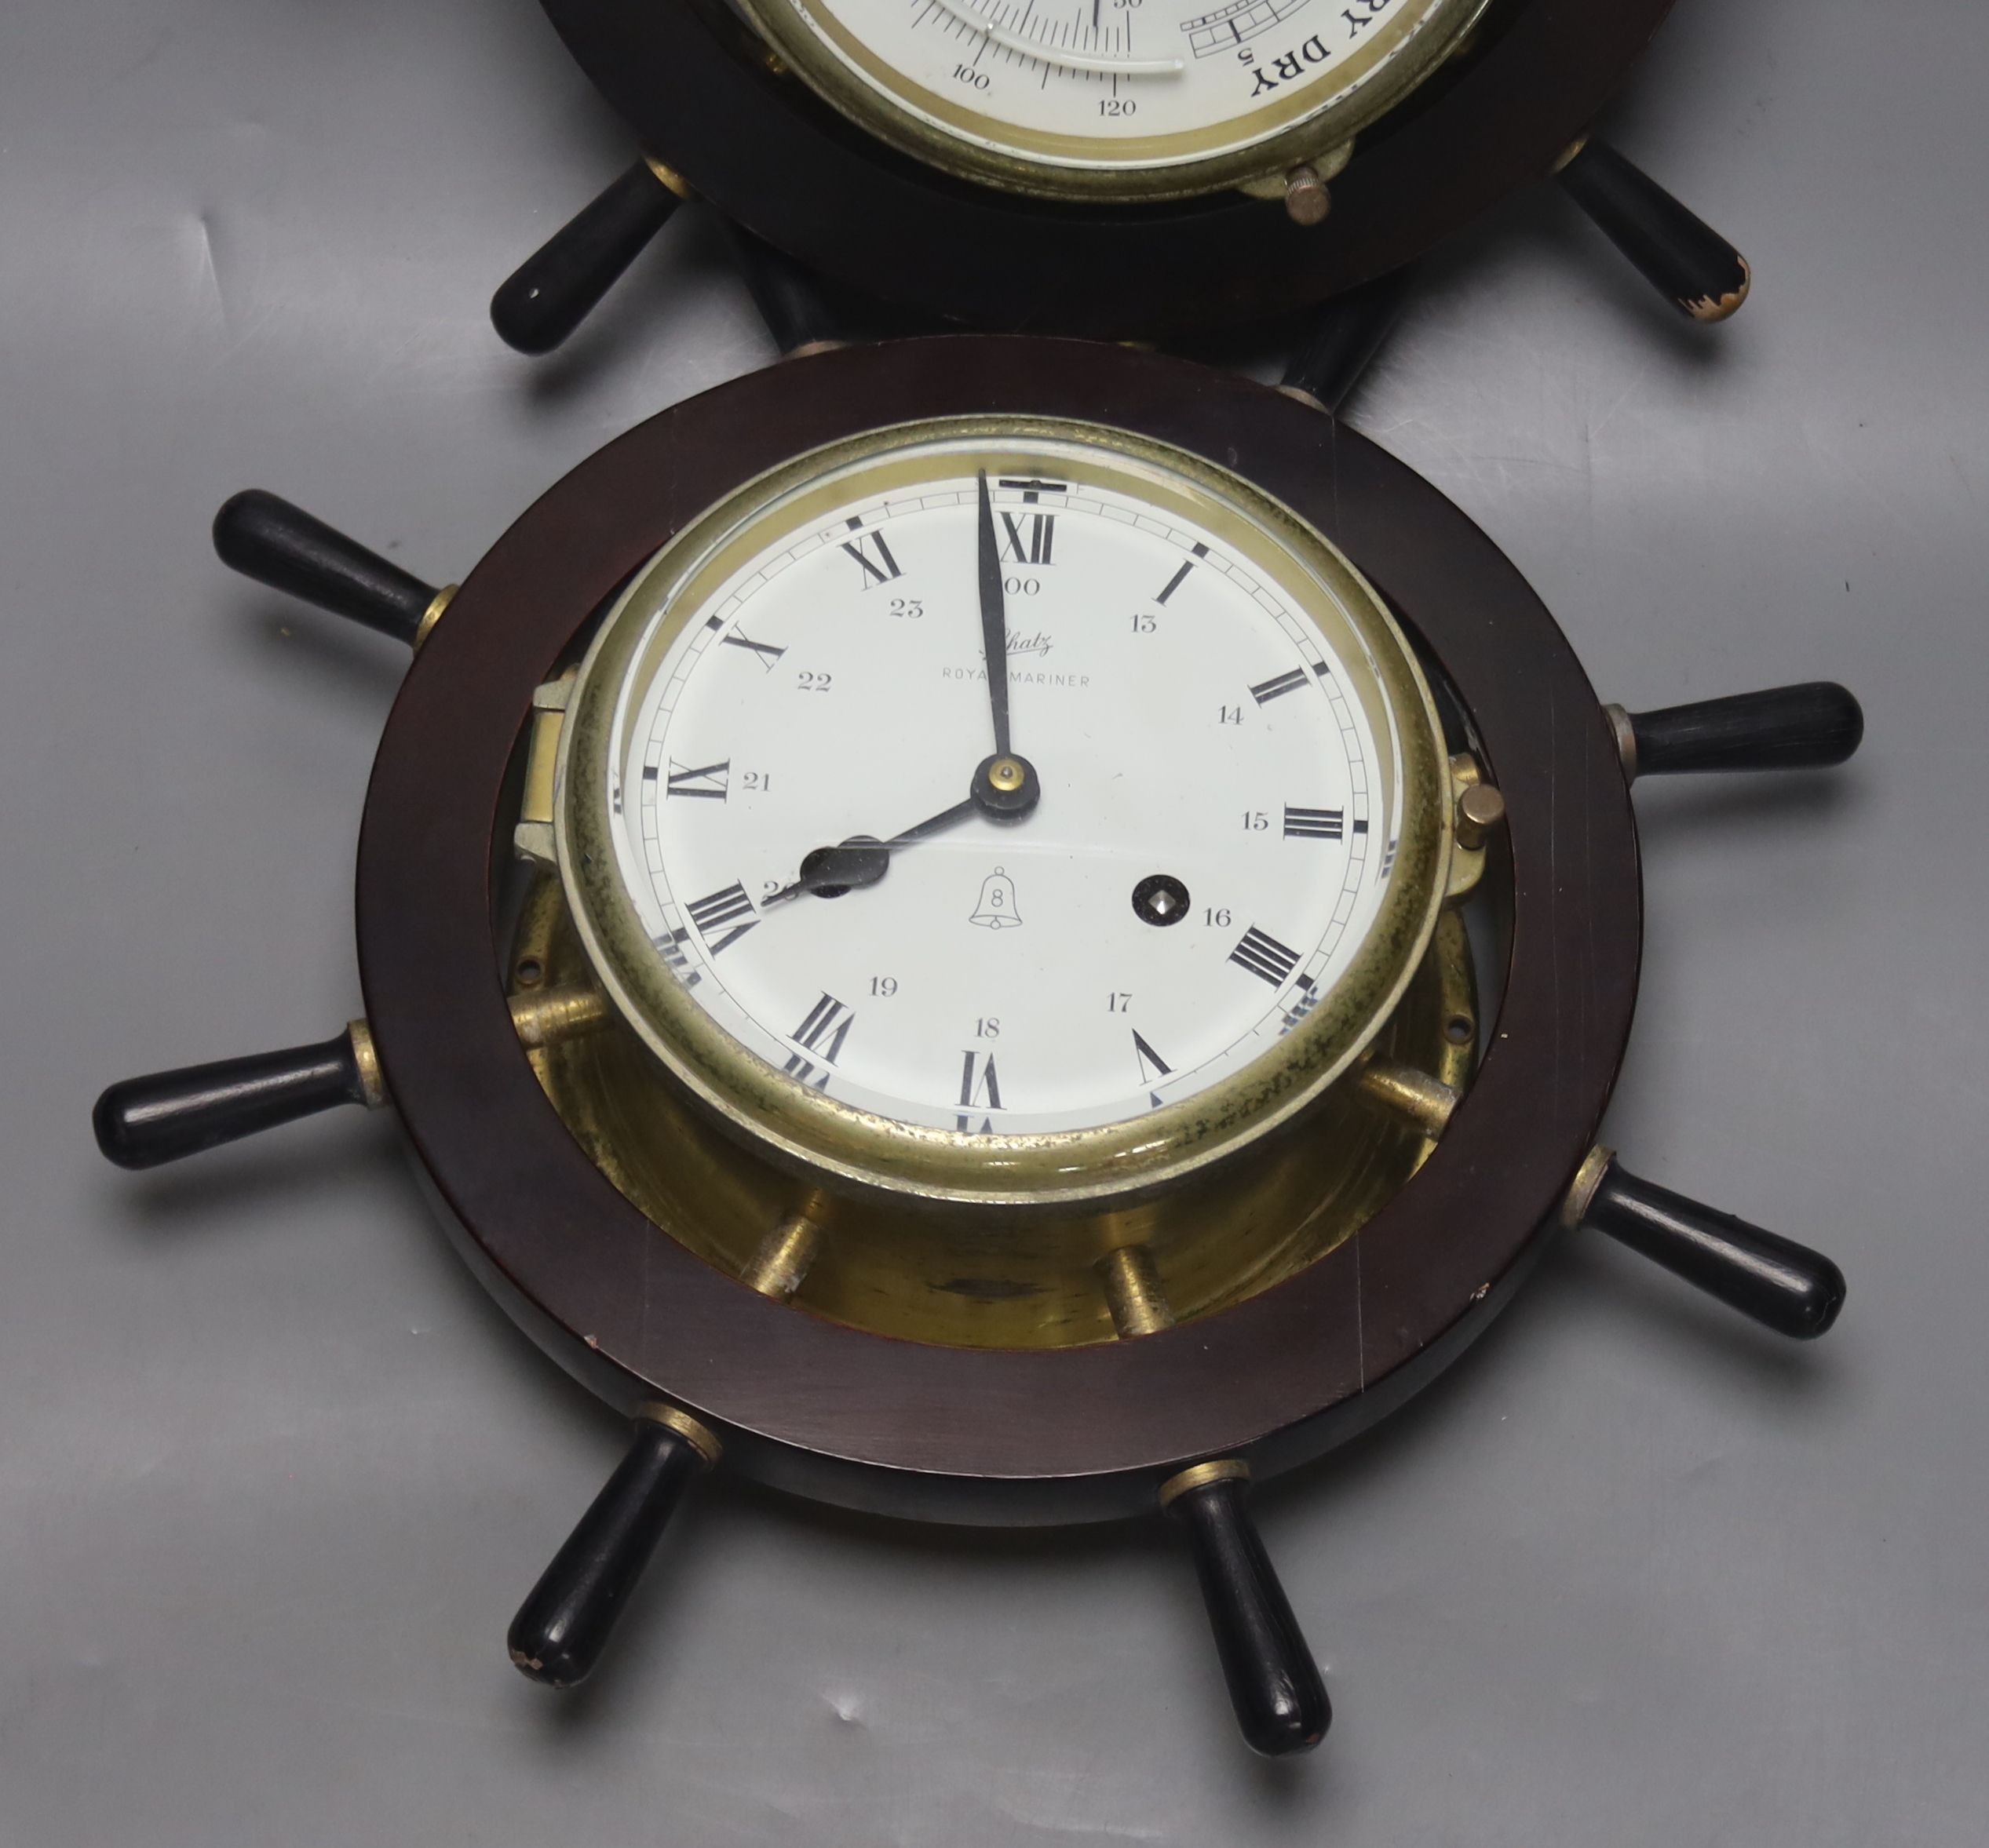 A pair of Schatz marine style wall hanging instruments: a clock and a holosteric compensated barometer, dials 13cm